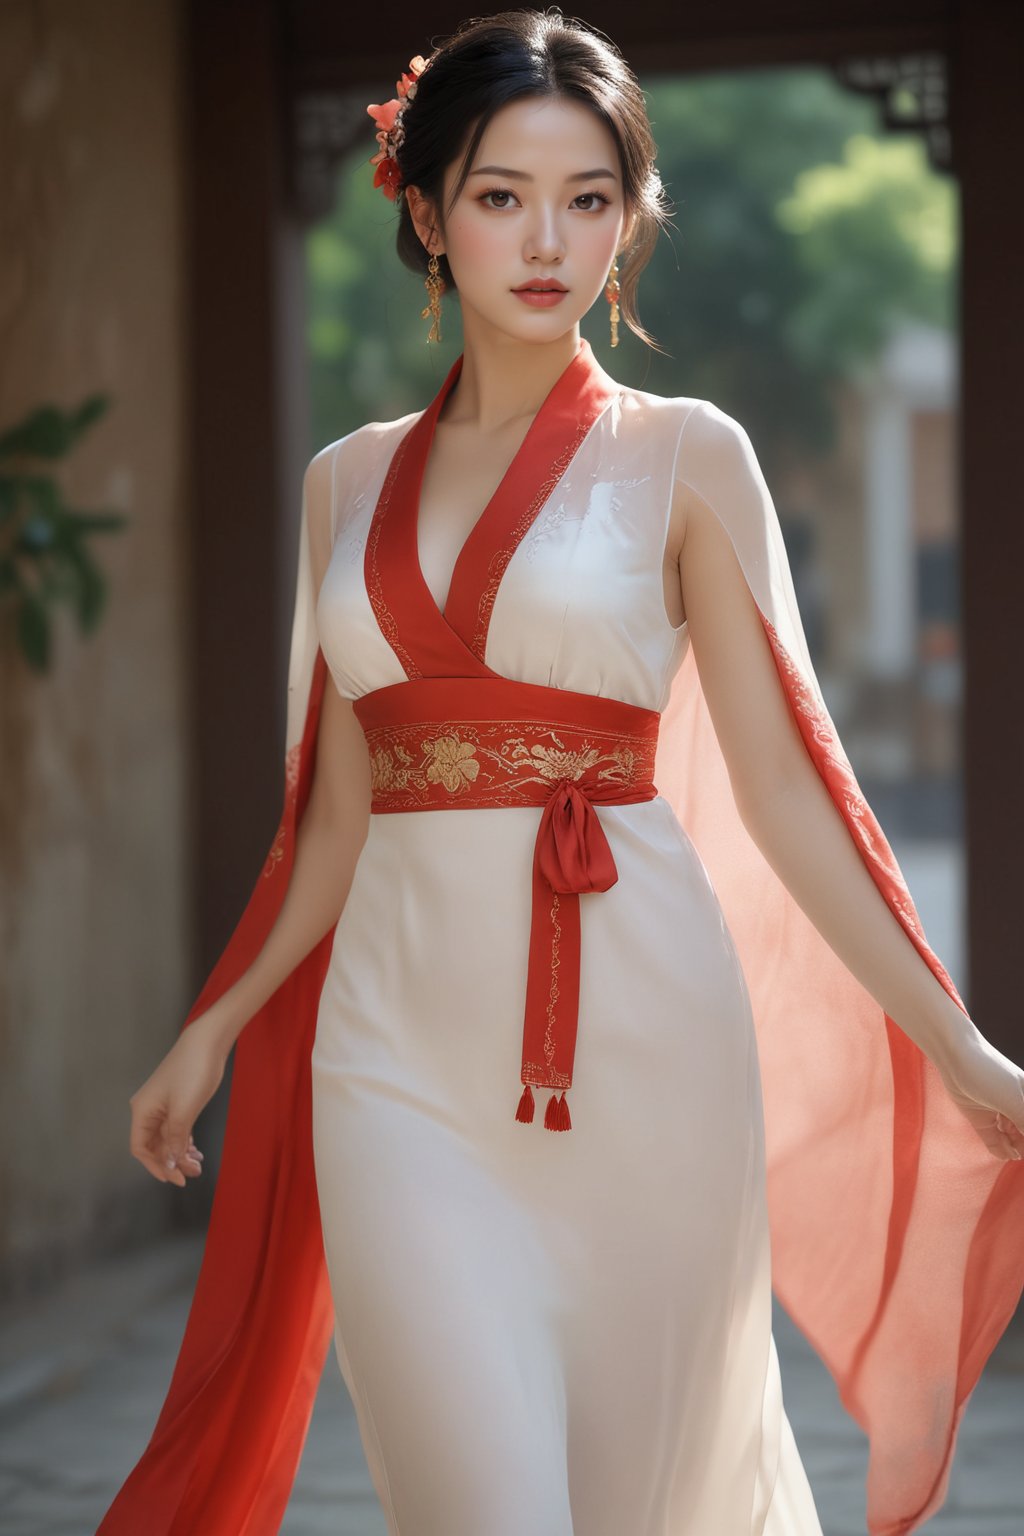 masterpiece,hubggirl,white dress,upper body,walking,looking at viewer, masterpiece,32k,extremely detailed cg unity 8k wallpaper, best quality, vibrant colors, break, china goddess, see through,1girl, long hair, black hair,dodger red see through clothes,gold dress,transparent shawl,1girl,red hanfu,earrings,best quality,masterpiece,raw photo, detailed face, beautiful symmetrical face, cute natural makeup, sadness, feminine, highly detailed, oriental minimalism, subtle elegance, hd , in the style of elegant clothing, realistic yet ethereal, simplistic designs, oriental, whimsical shapes, serene harmony beautiful symmetrical face, elegant, feminine, highly detailed, intricate,best quality, ultra-detailed, masterpiece, hires, 8k,(photorealistic),transparent,skin white and smooth,transparent shawl,high heels,